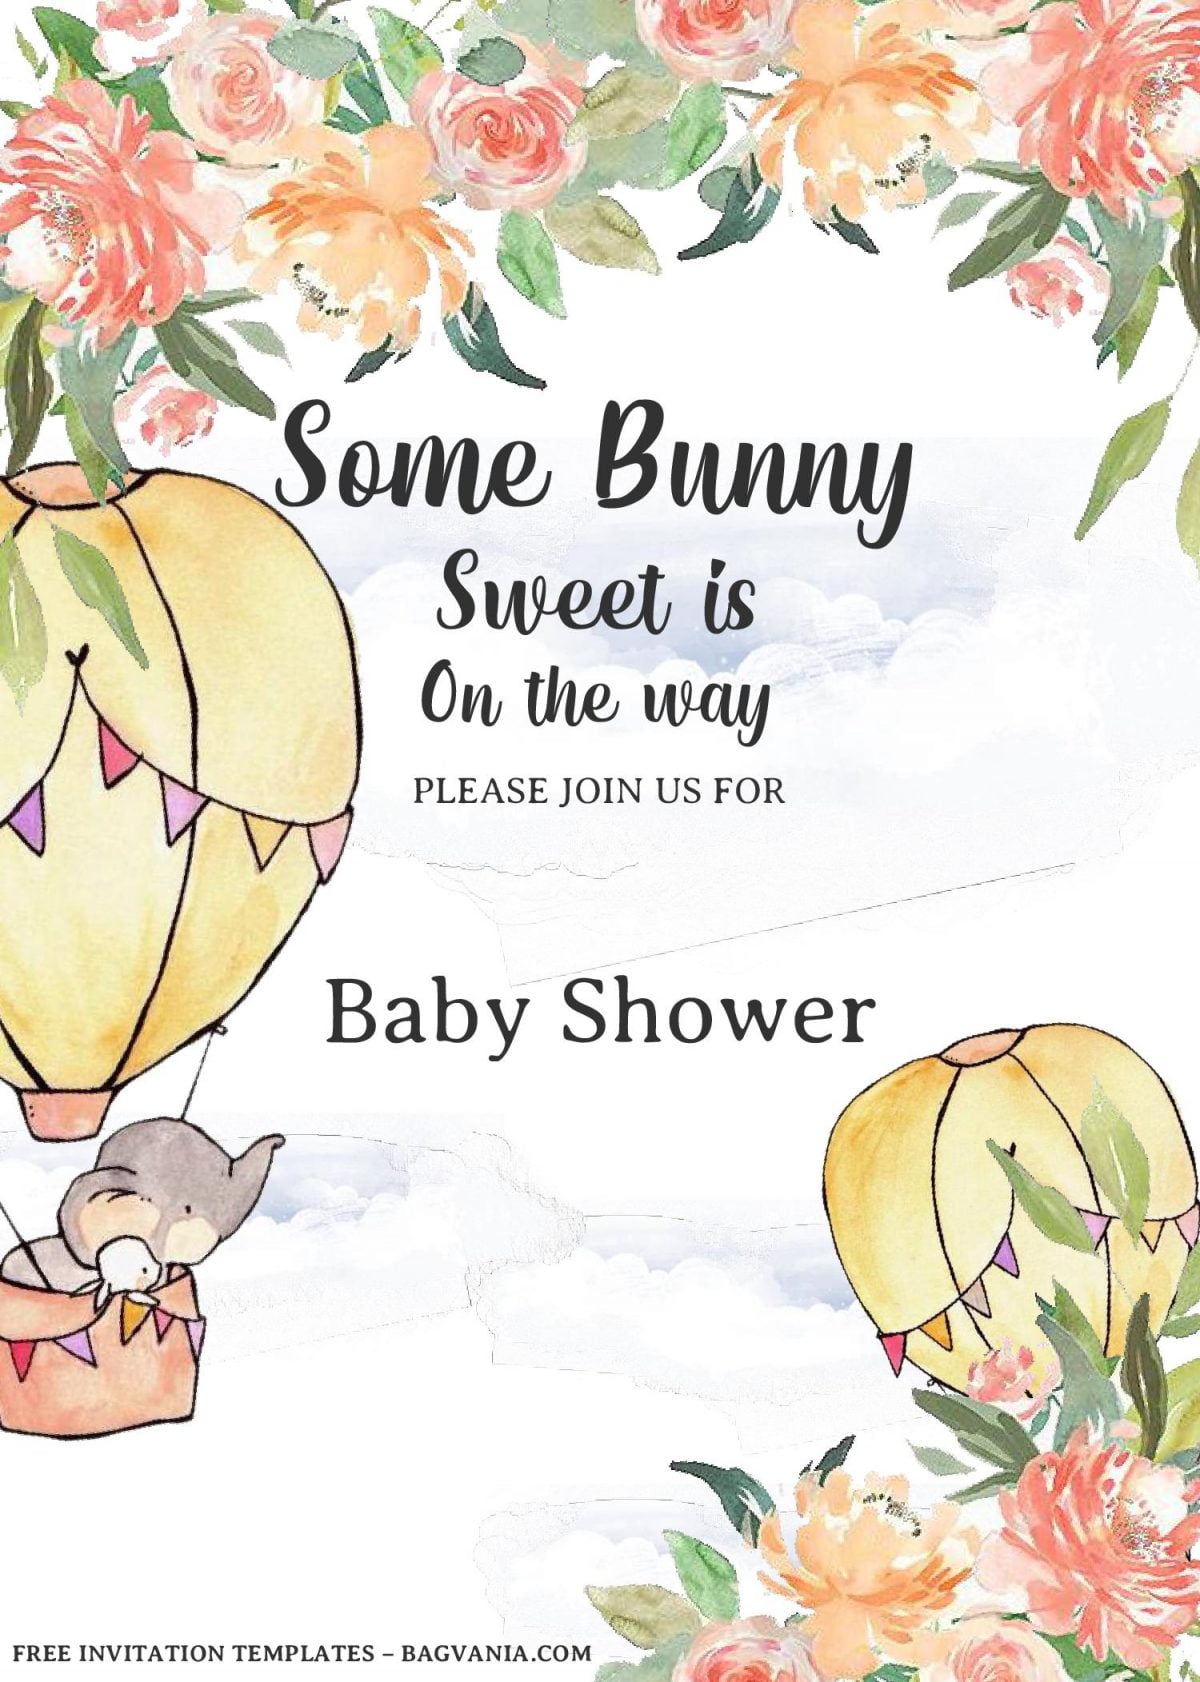 Some Bunny Invitation Templates - Editable With MS Word and has hot air balloons